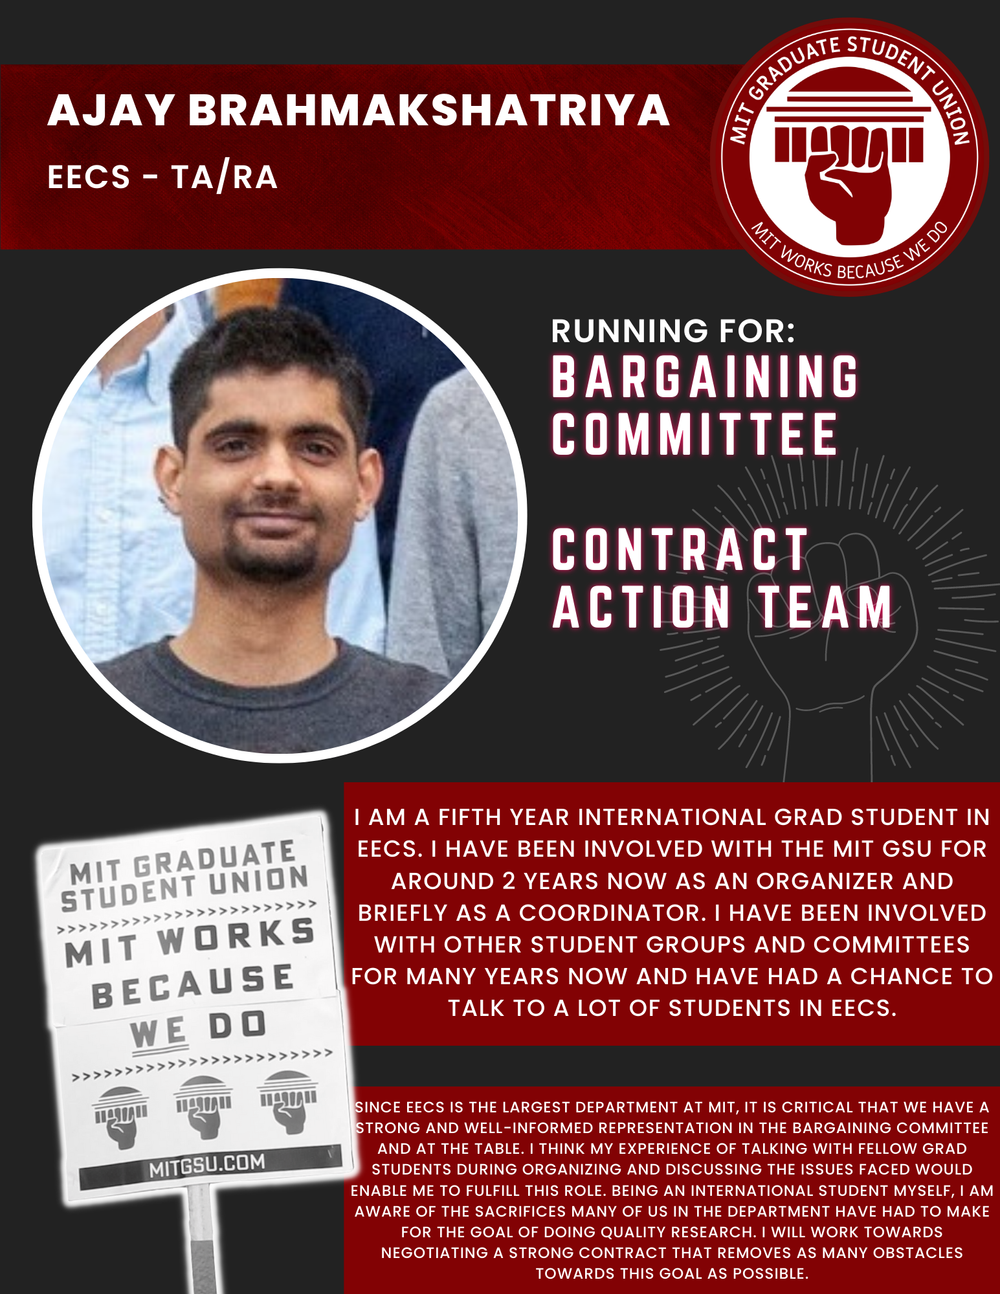  AJAY BRAHMAKSHATRIYA  EECS - TA/RA  RUNNING FOR: Bargaining Committee  Contract Action Team  I AM A FIFTH YEAR INTERNATIONAL GRAD STUDENT IN EECS. I HAVE BEEN INVOLVED WITH THE MIT GSU FOR AROUND 2 YEARS NOW AS AN ORGANIZER AND BRIEFLY AS A COORDINA